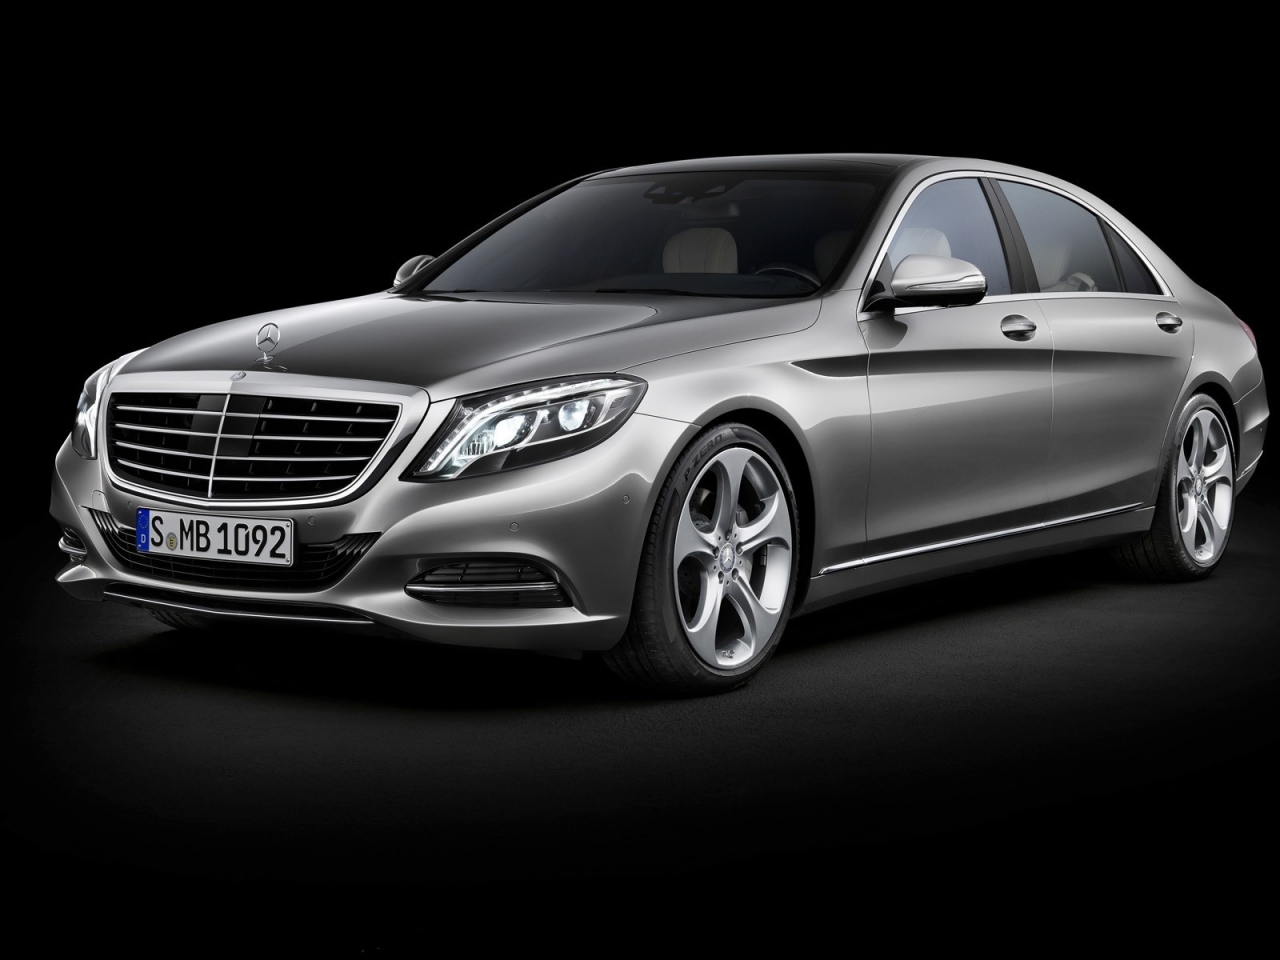 New Mercedes S Class for 1280 x 960 resolution